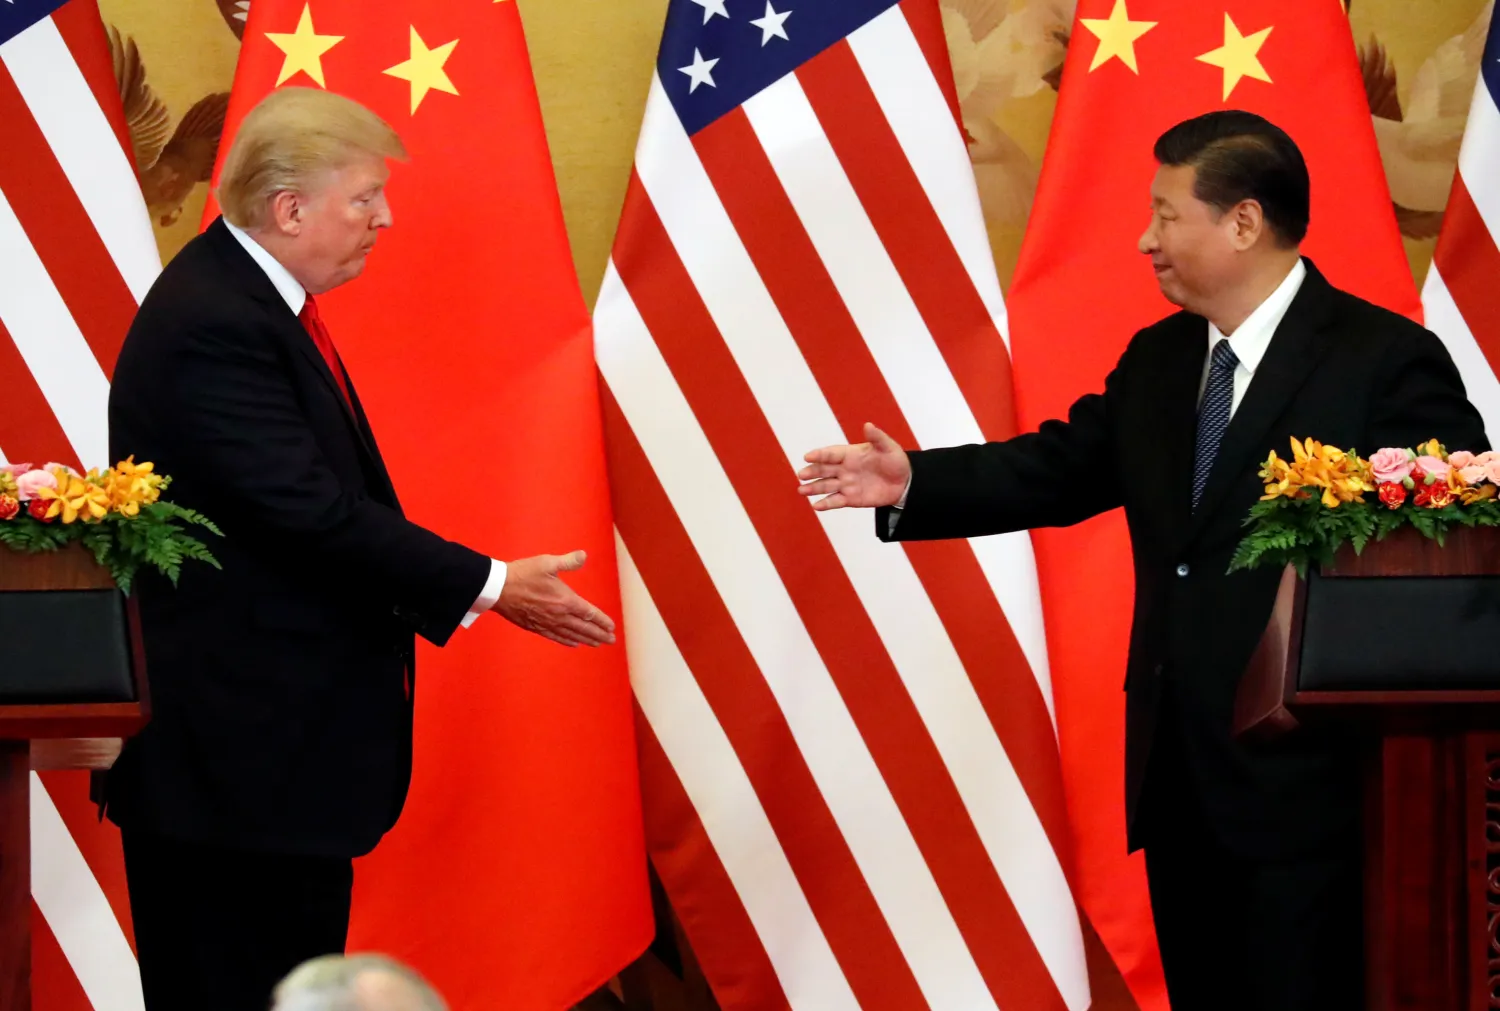 Donald Trump is preparing for a substantial trade conflict with China.